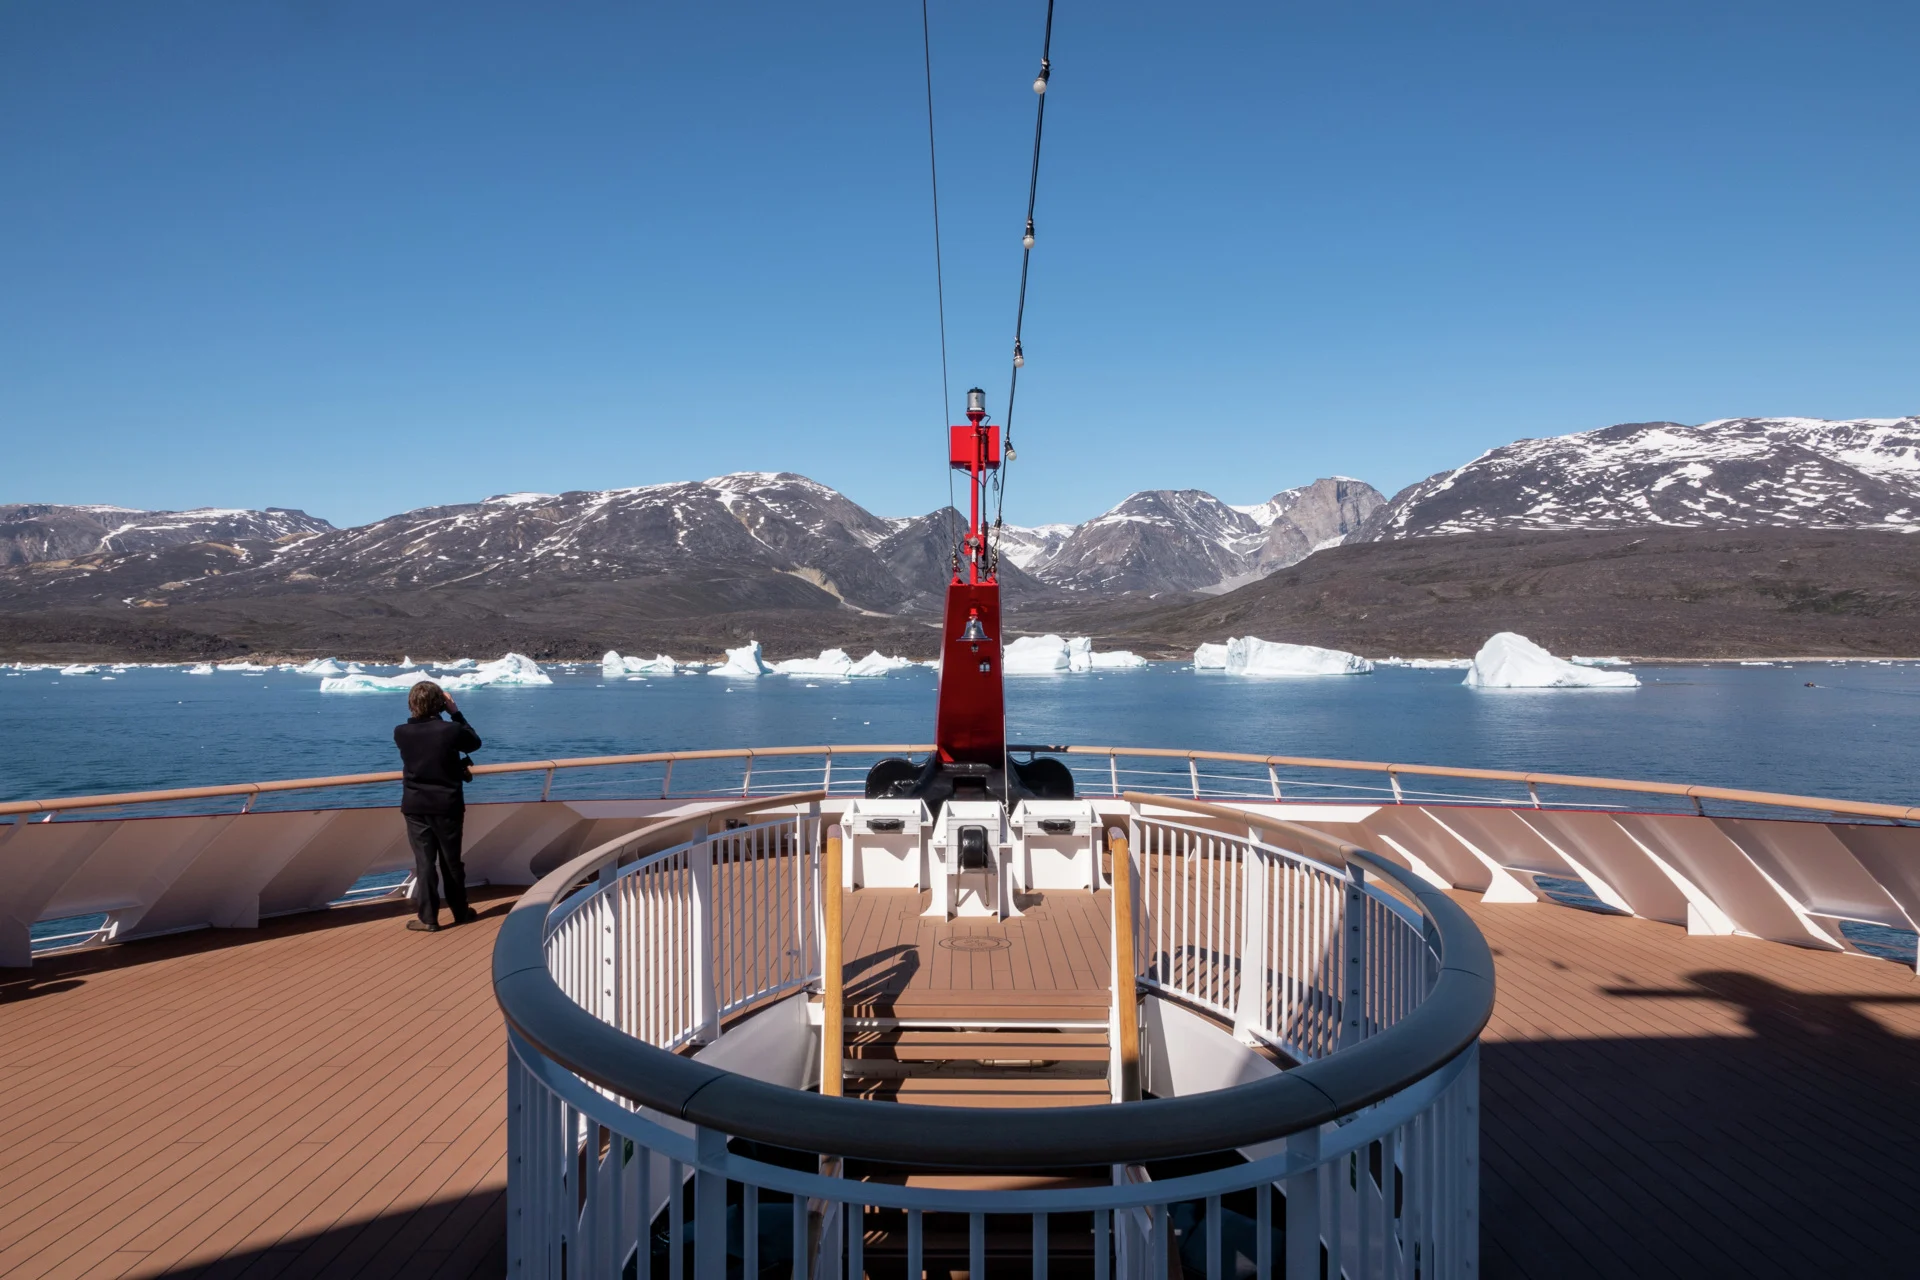 A guest photographing from the observation deck on board MS Fridtjof Nansen, Camp Frieda, Greenland. Credit: Andrea Klaussner.